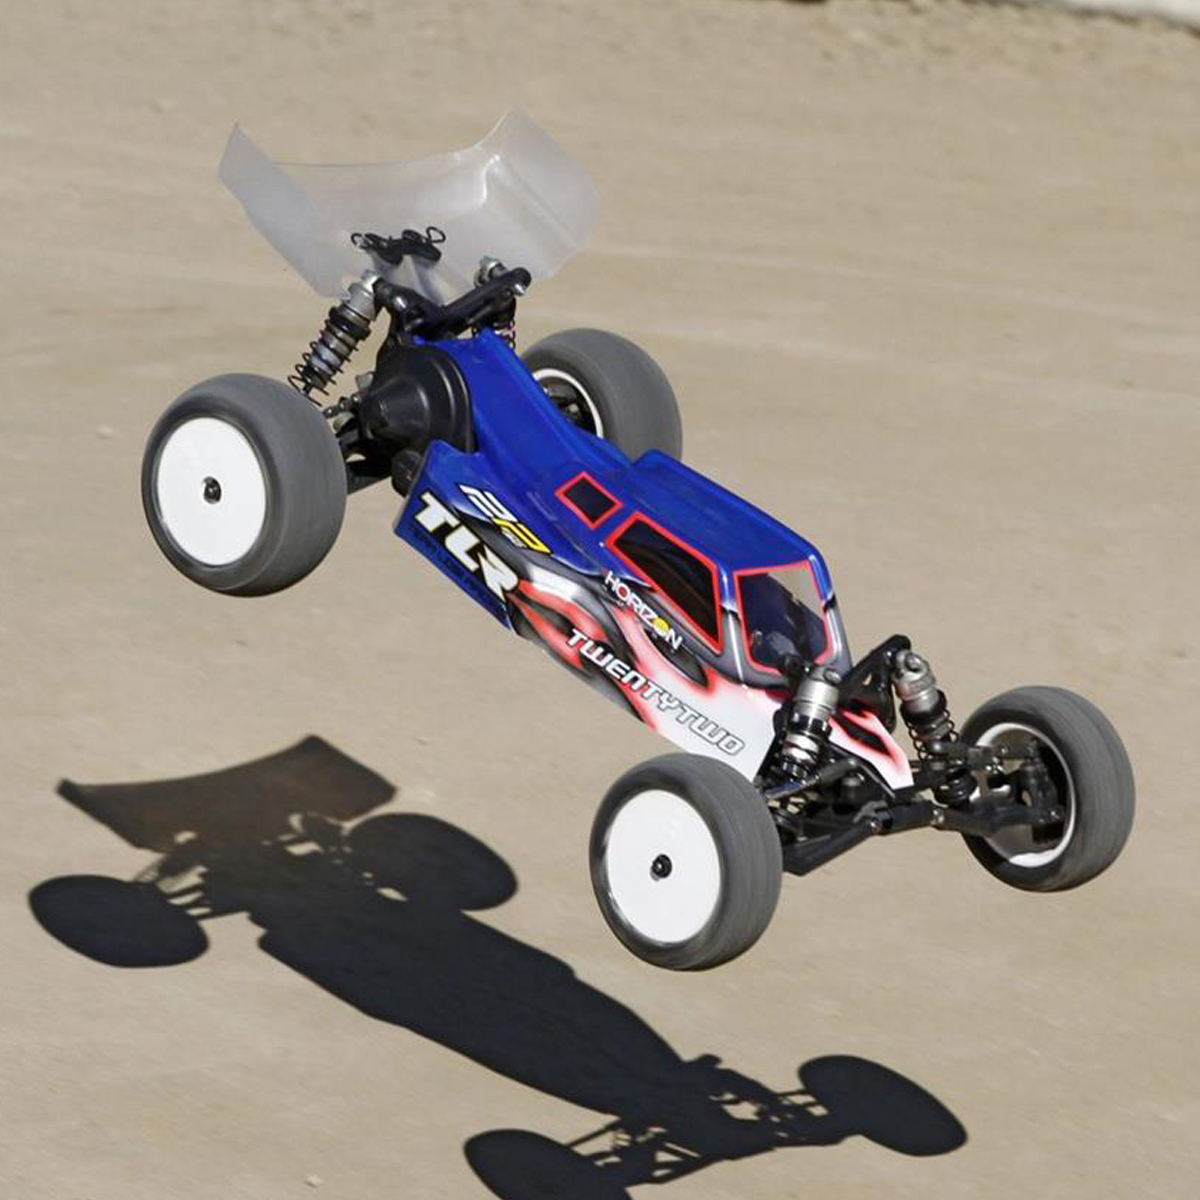 Do Race Buggies Really Need To Look Like This?